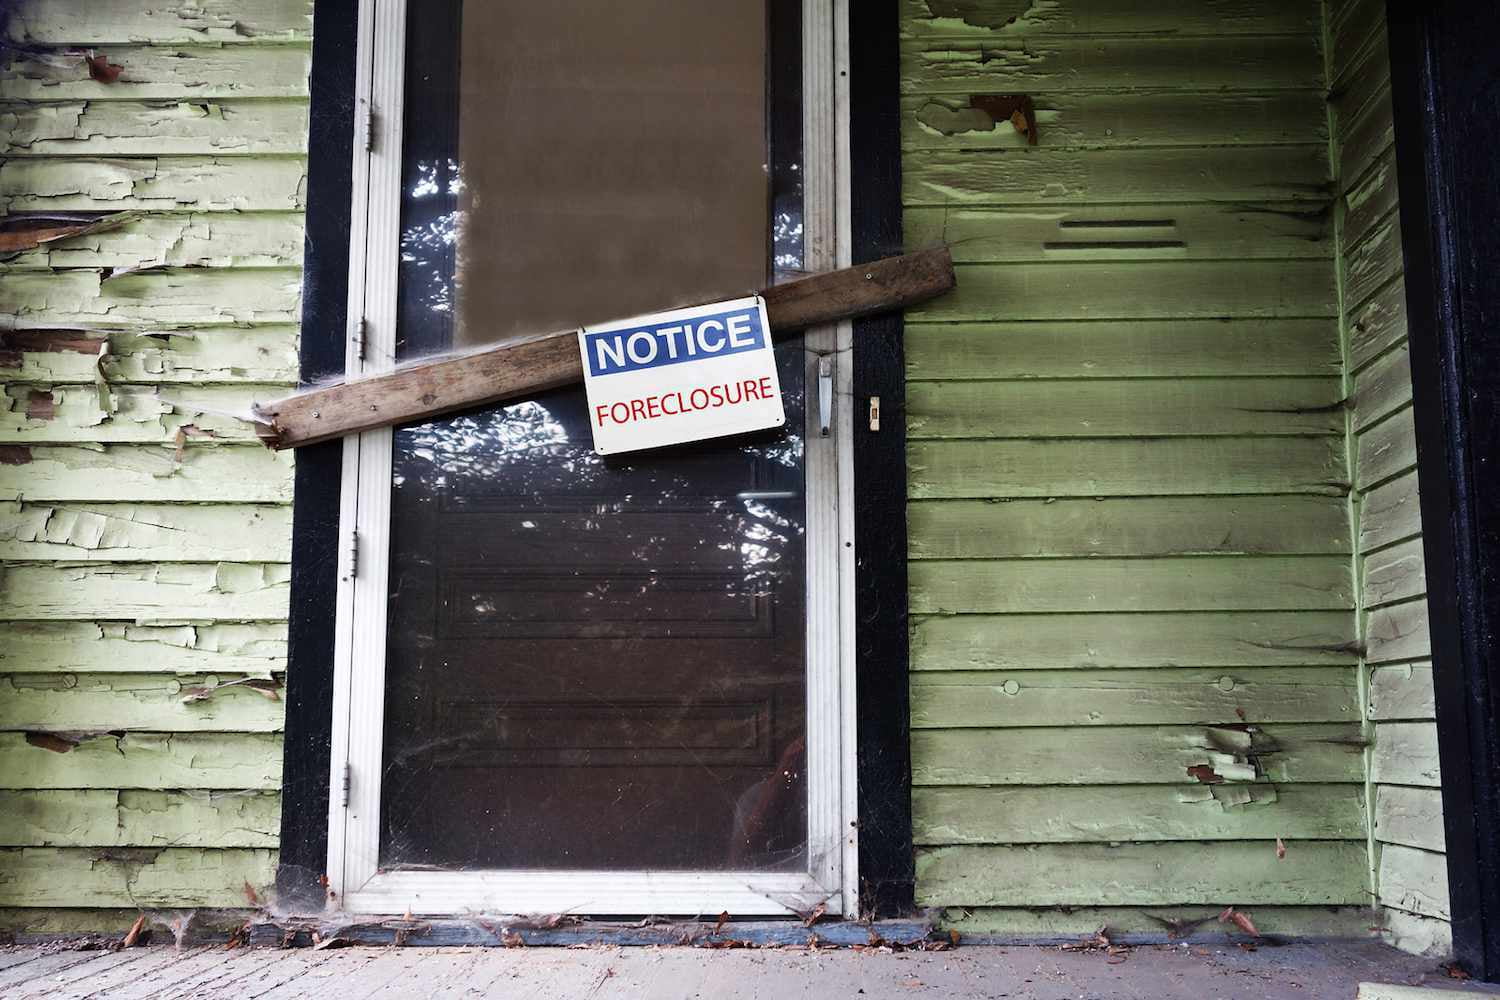 Thinking foreclosures will collapse the market? Not likely...